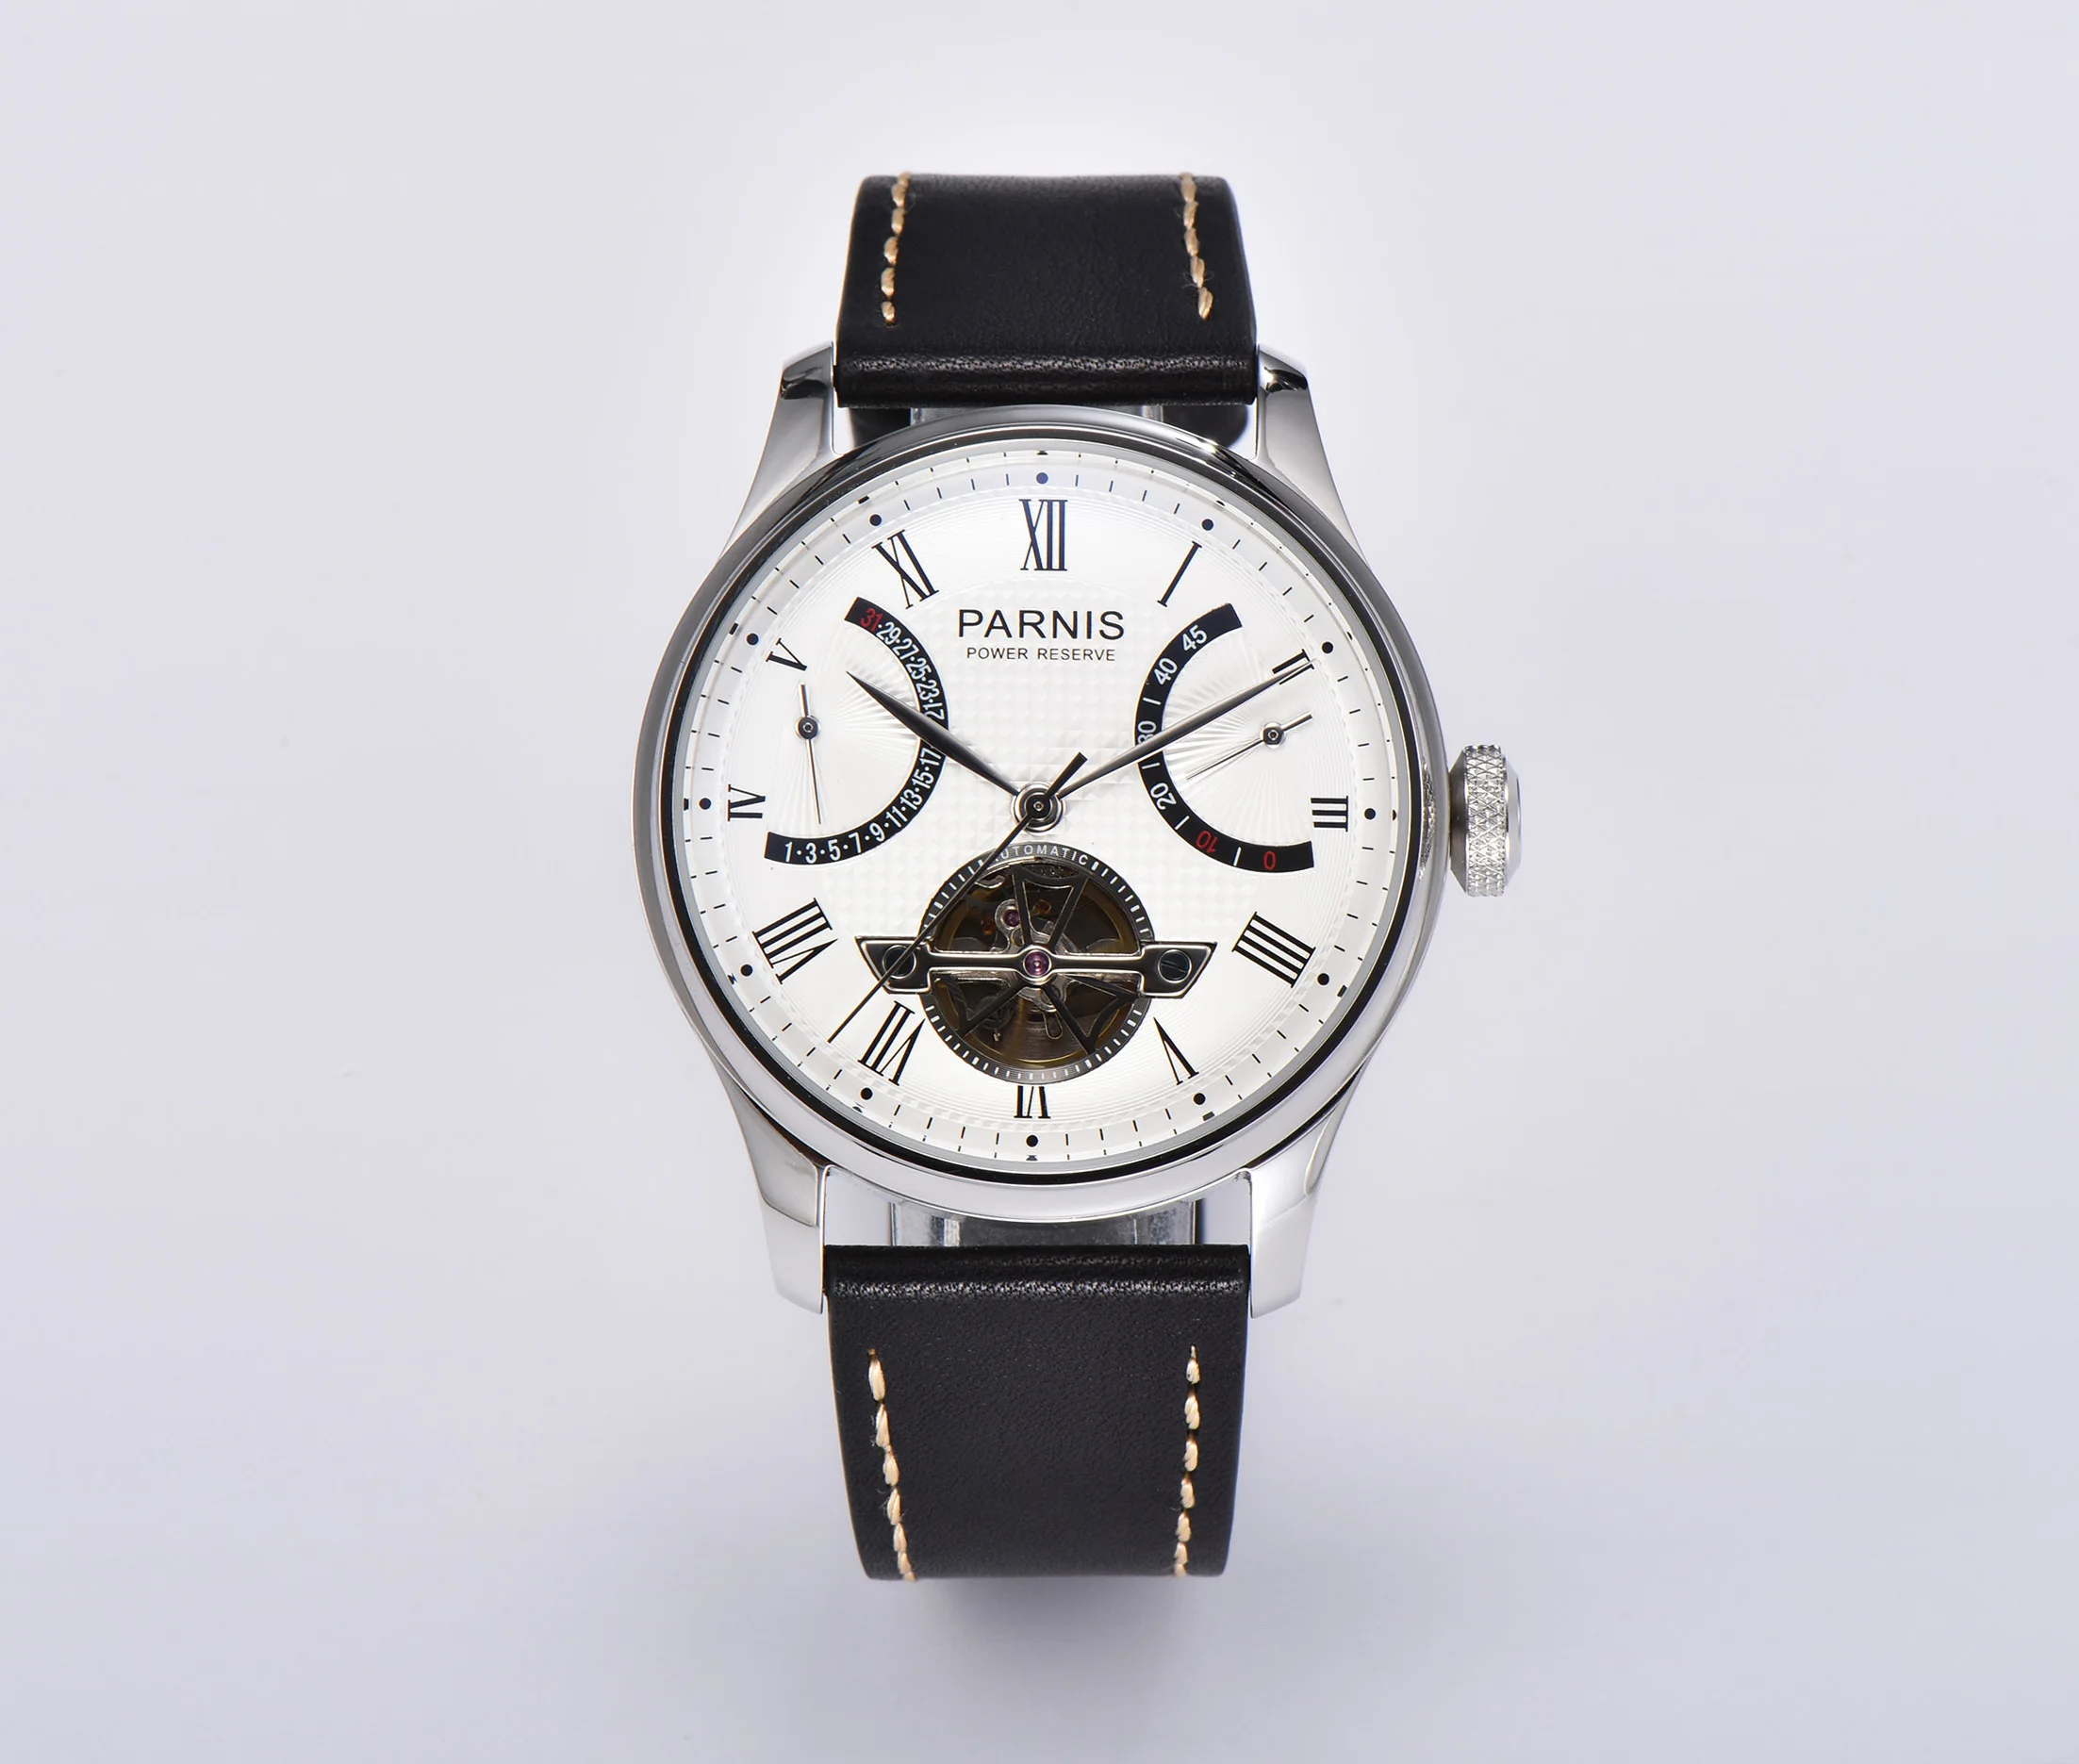 

New 42.5mm Men's Business Watch 316 Stainless Steel Leather Strap Seagull Tianjin 2502 Automatic Movement